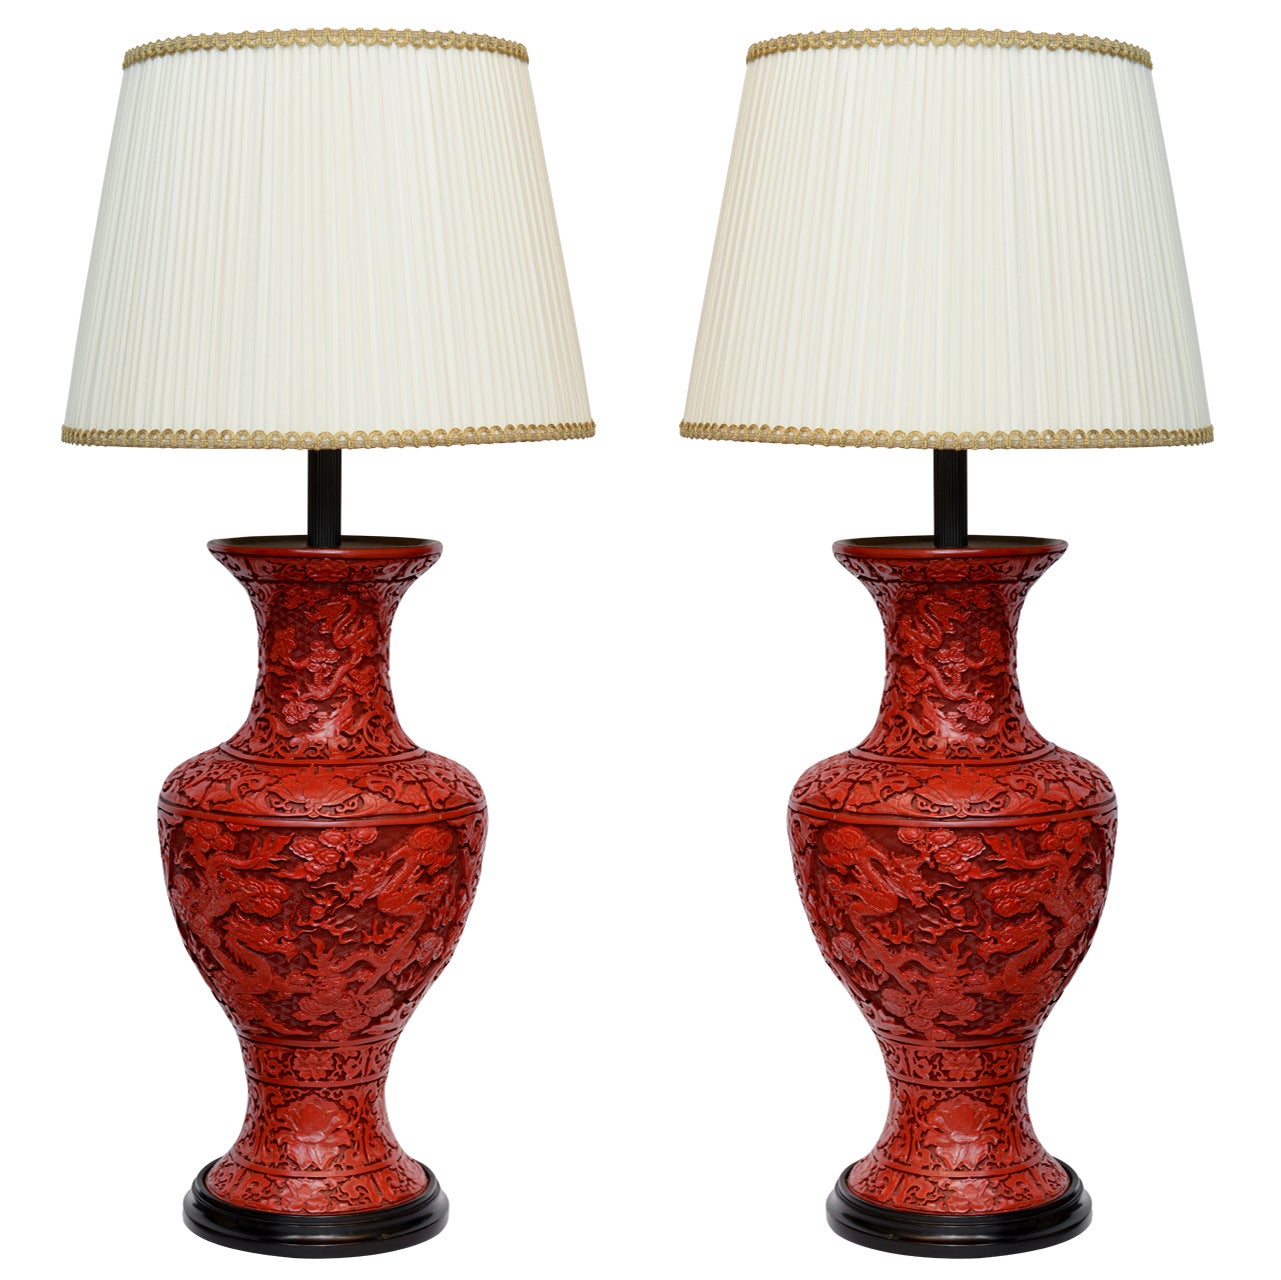 A Massive Pair Of Red Lacquered Cinnabar Lamps. 19th Century